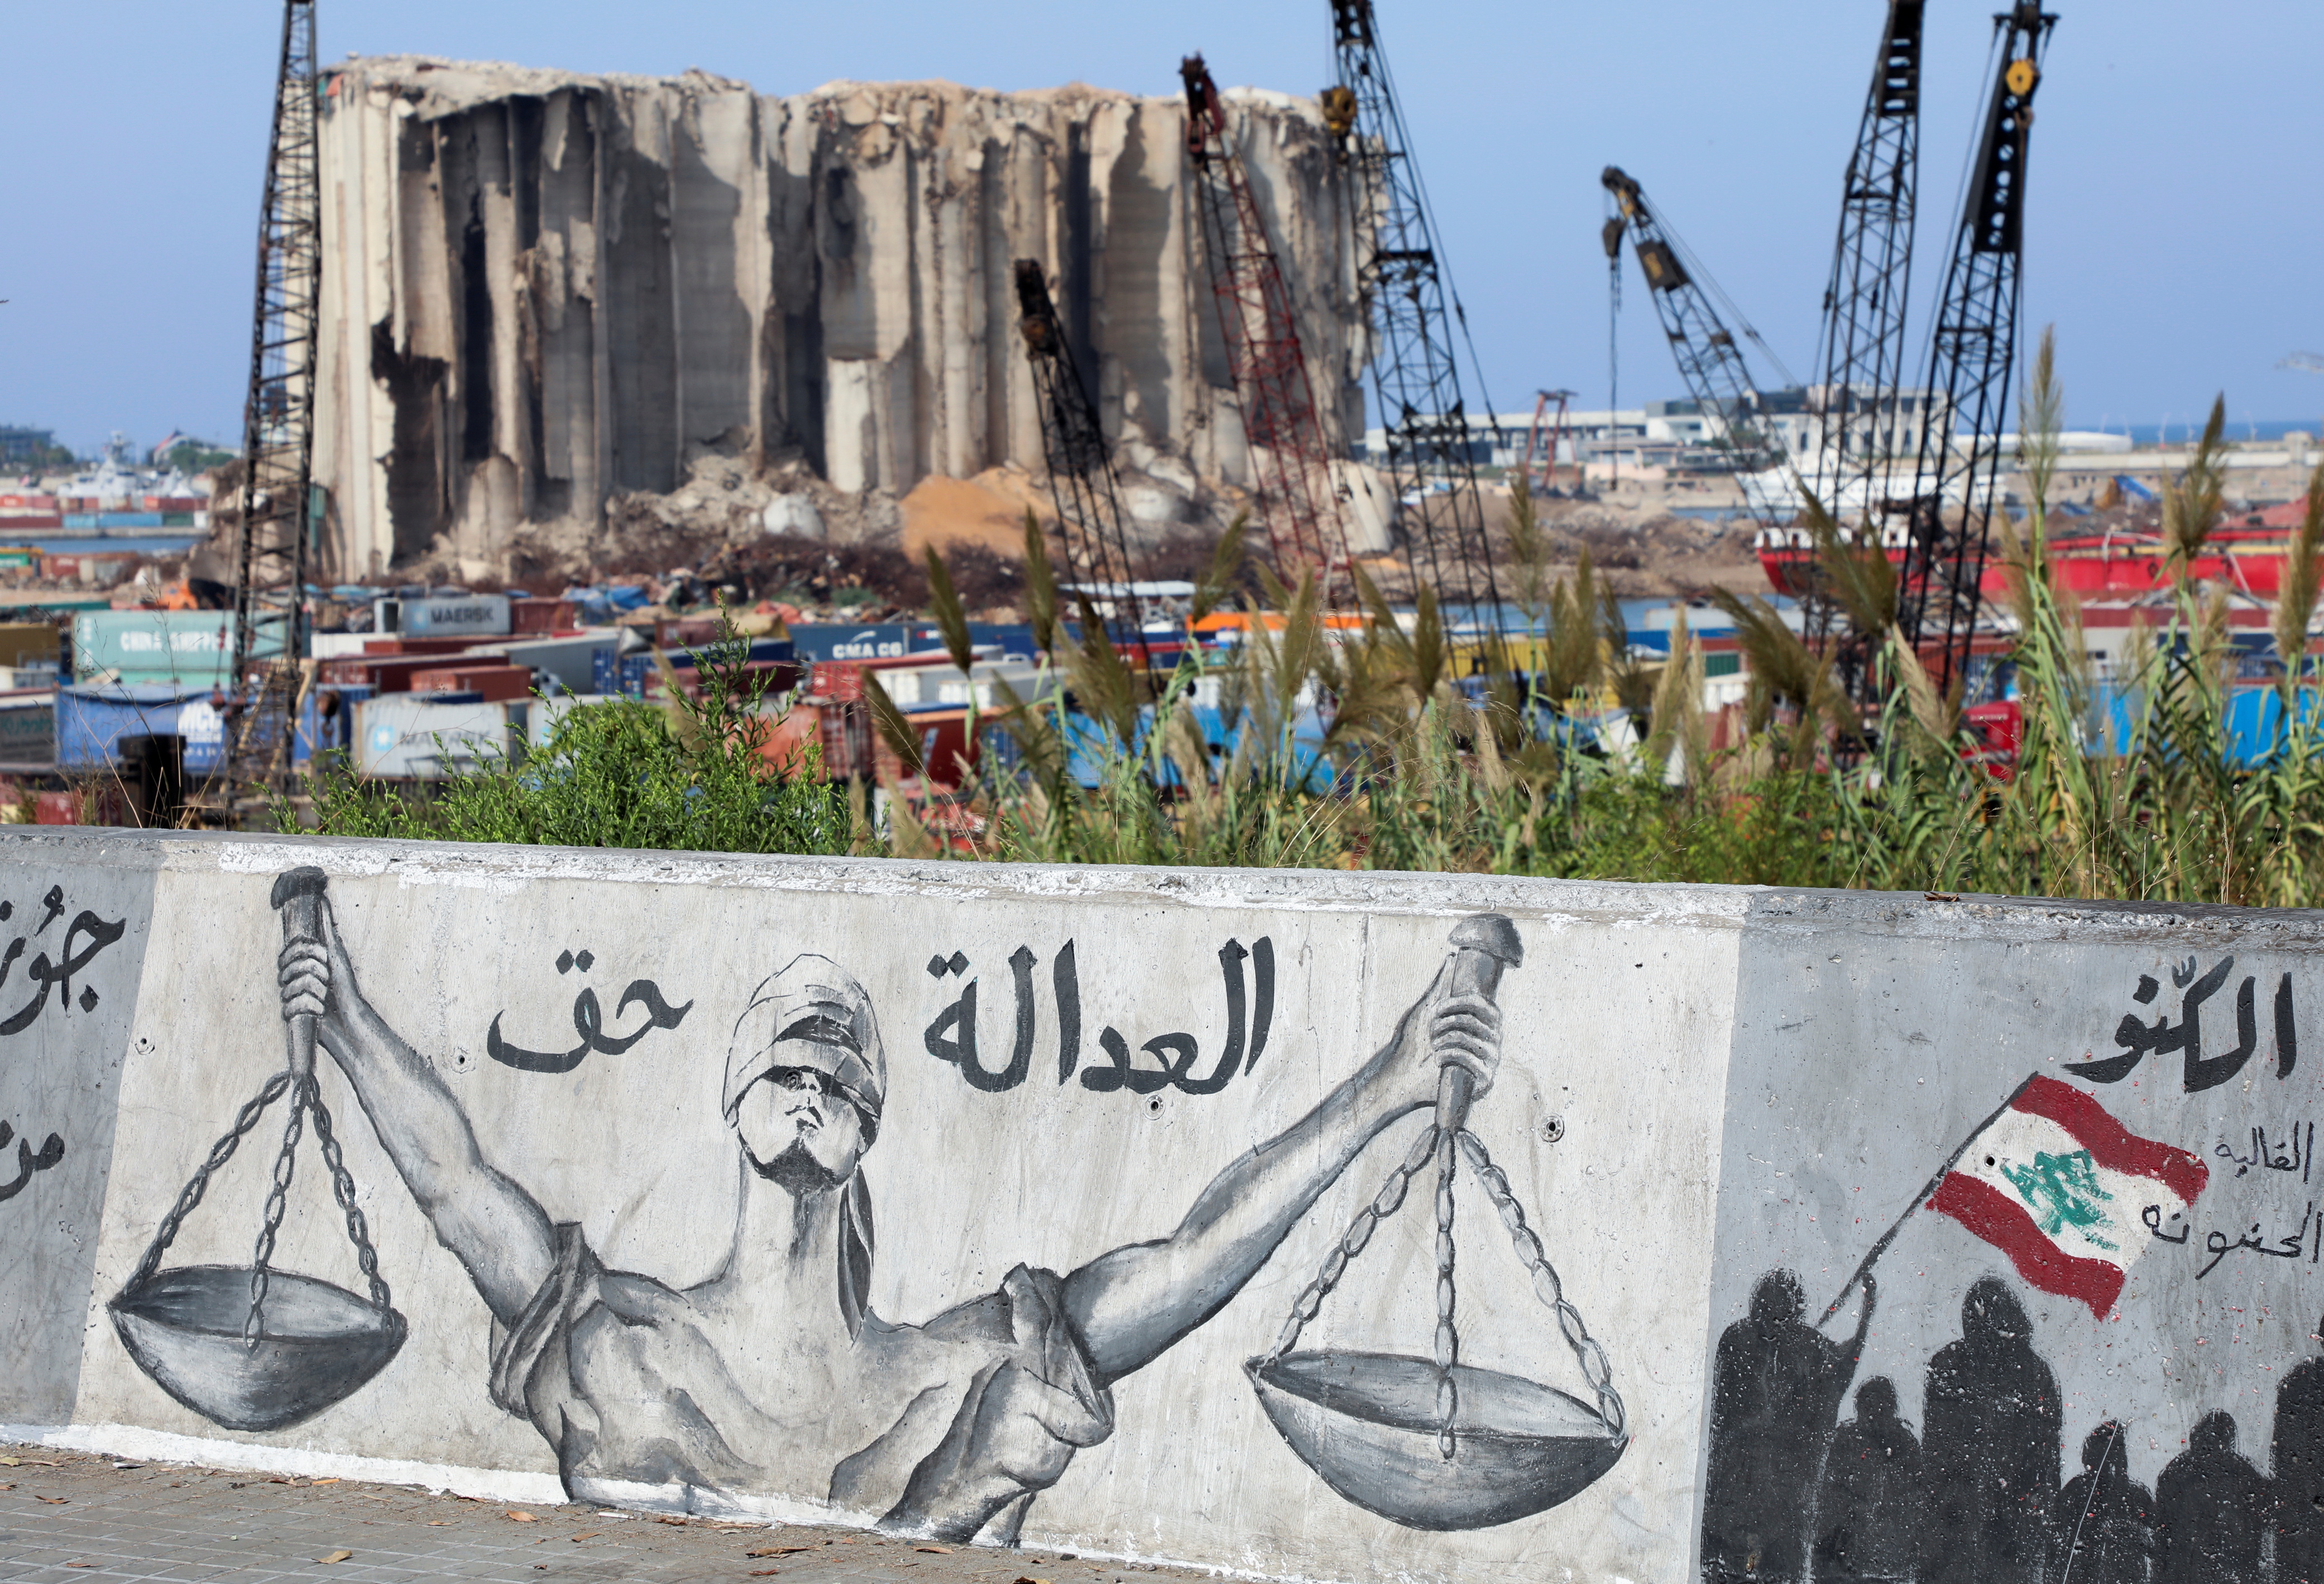 A general view shows the site of the 2020 Beirut port explosion, Lebanon October 13, 2021. The Arabic reads: 'The right to justice'. REUTERS/Mohamed Azakir